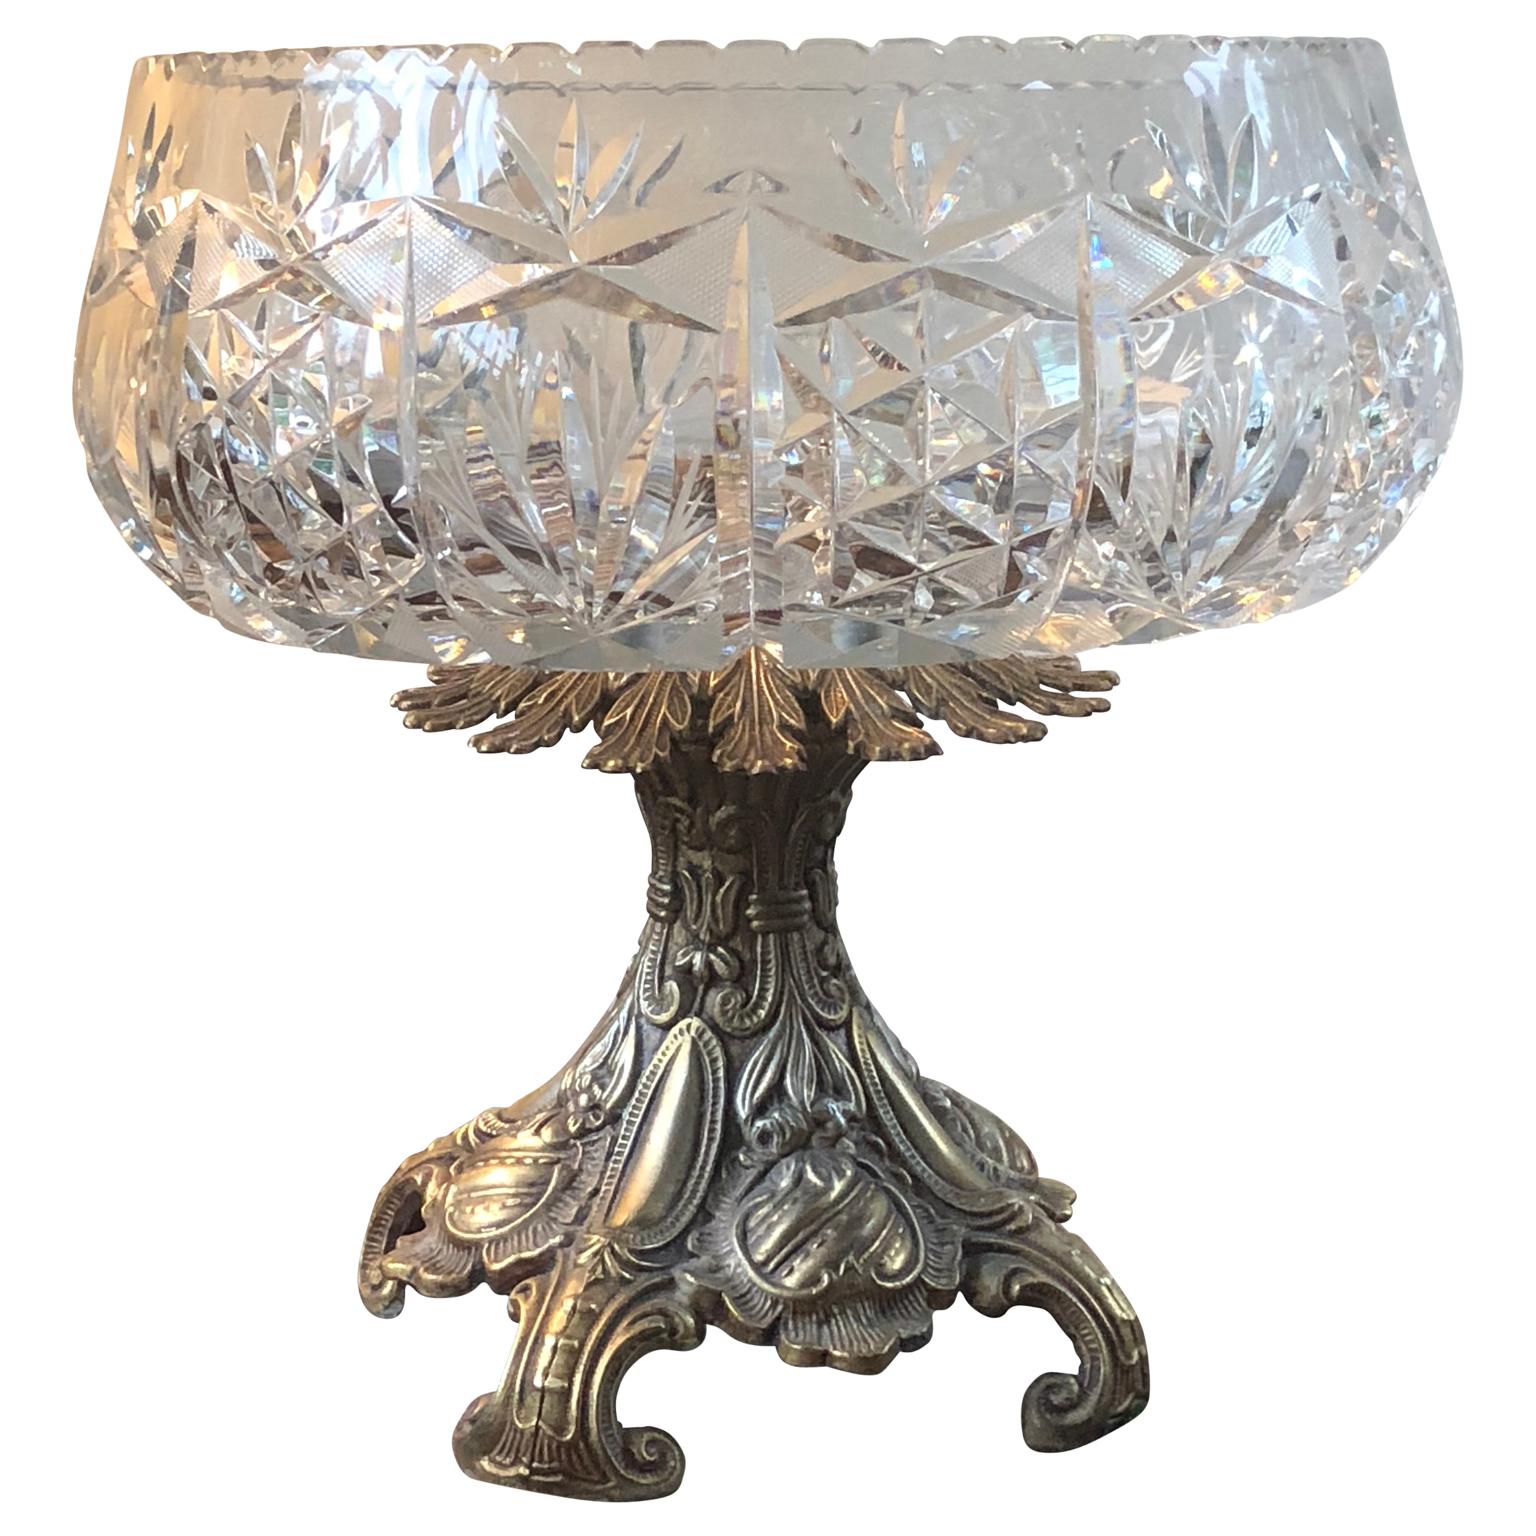 Large crystal centerbowl on Rococo style bronze stand.